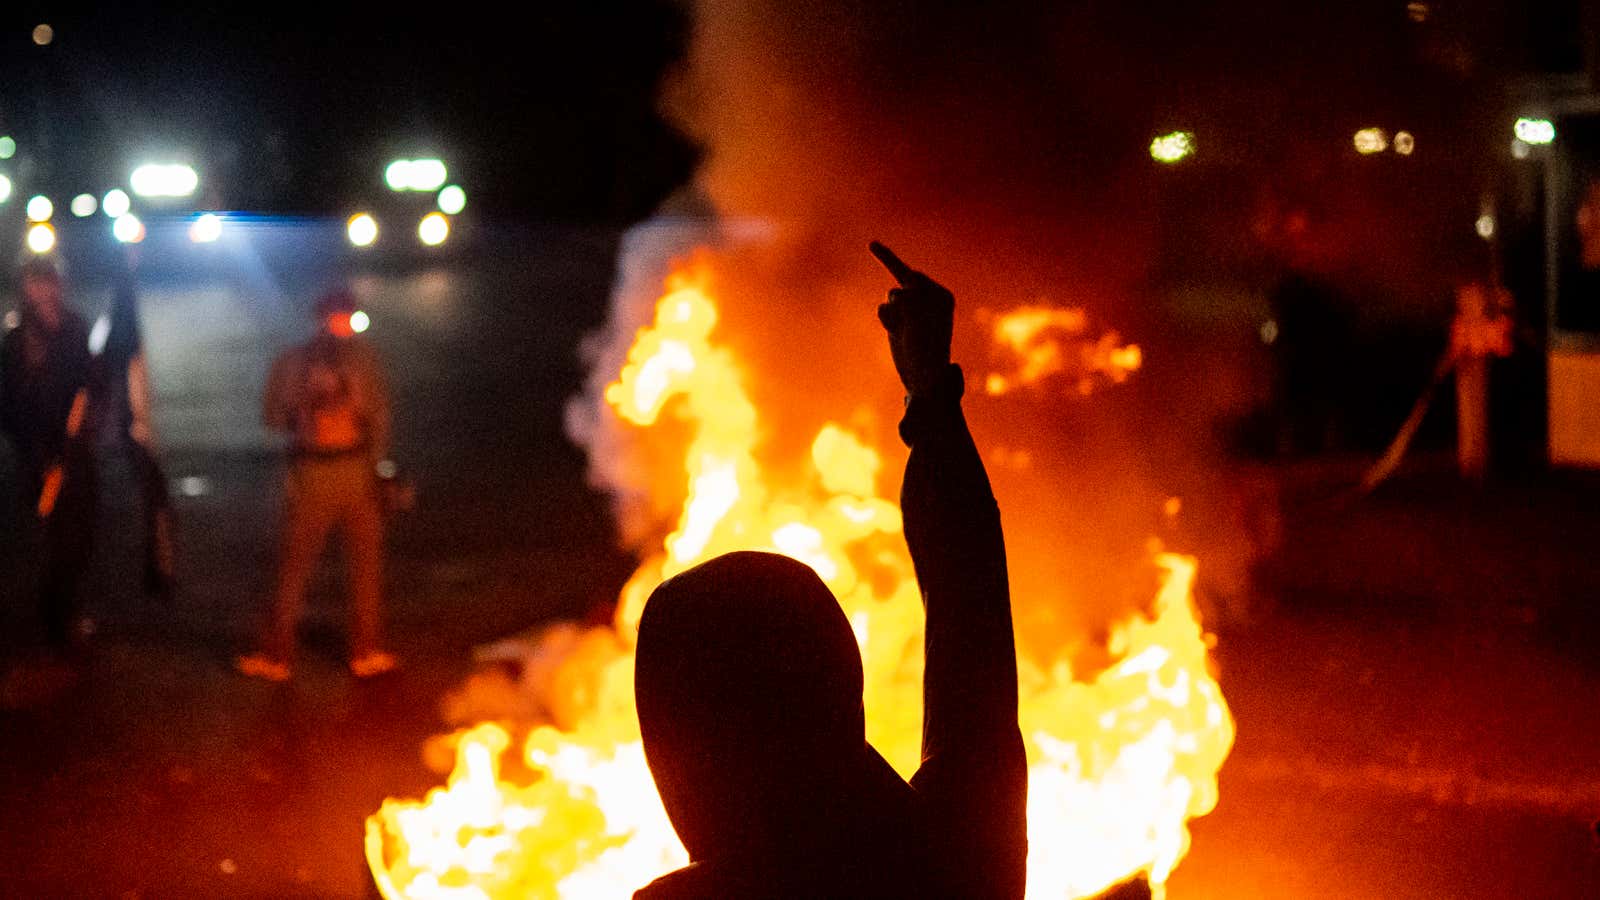 Protesters chant in front of a fire near the North police precinct during a protest against racial injustice and police brutality on September 6, 2020 in Portland, Oregon. 
